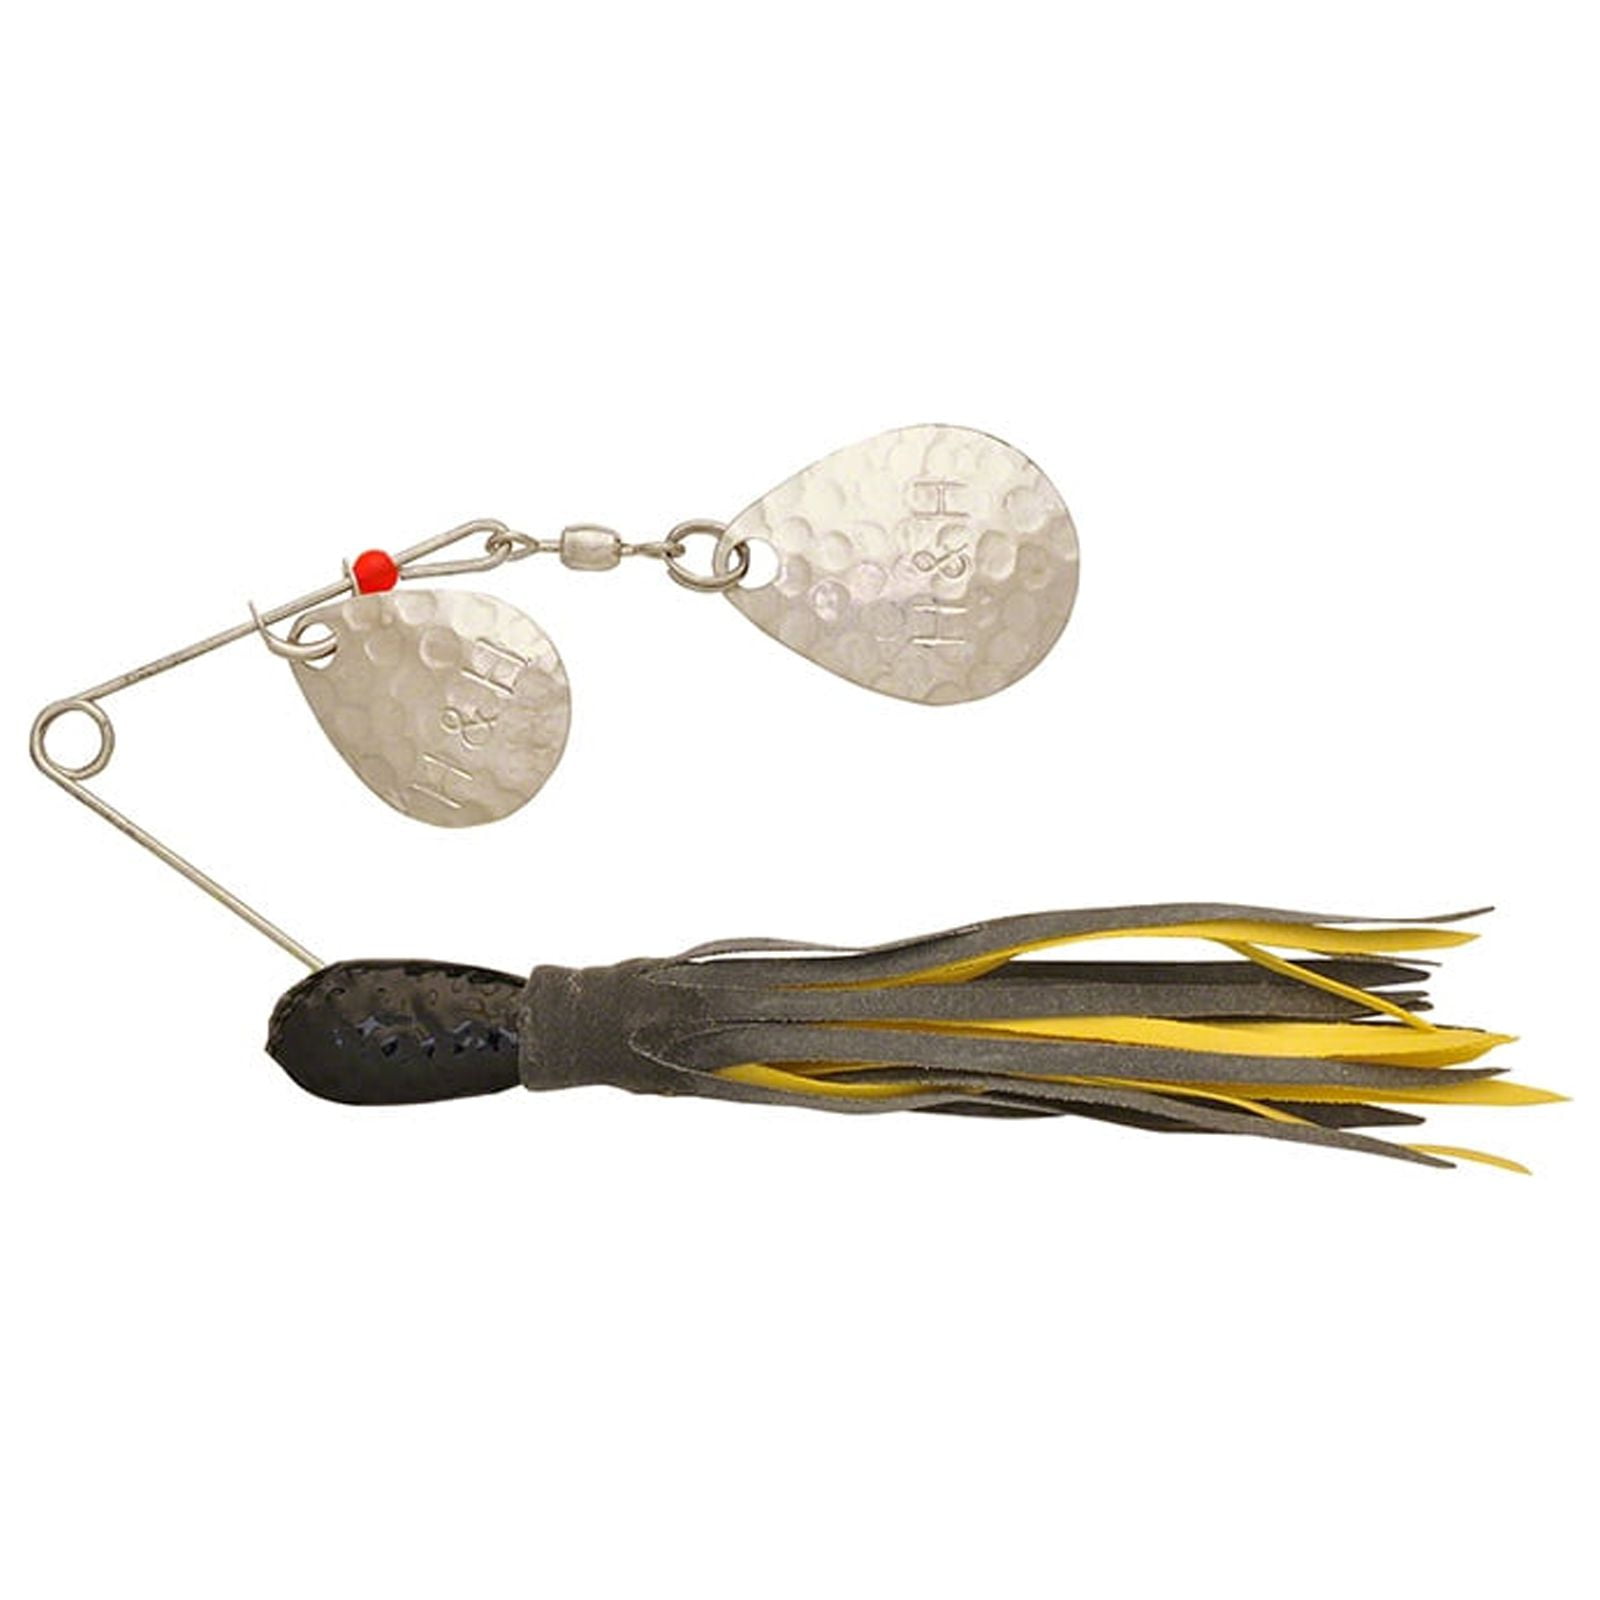 H&H Double Spinner Spinner Bait, Black & Yellow, 3/8 oz, 12 Count,  HHDS115-02 